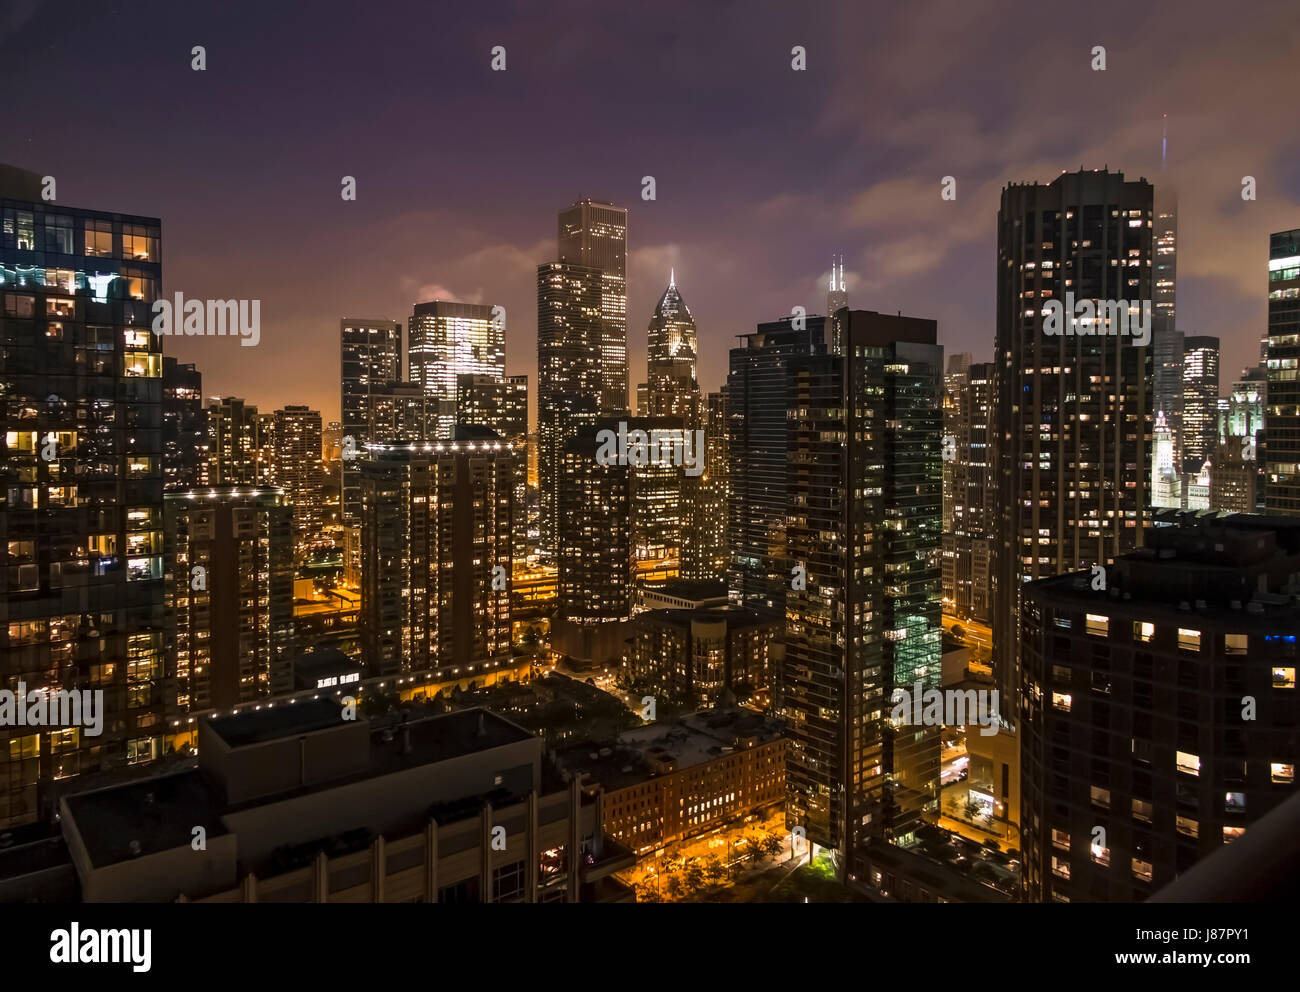 Dusk scenic of Chicago Skyscrapers from Lake front building USA Stock Photo